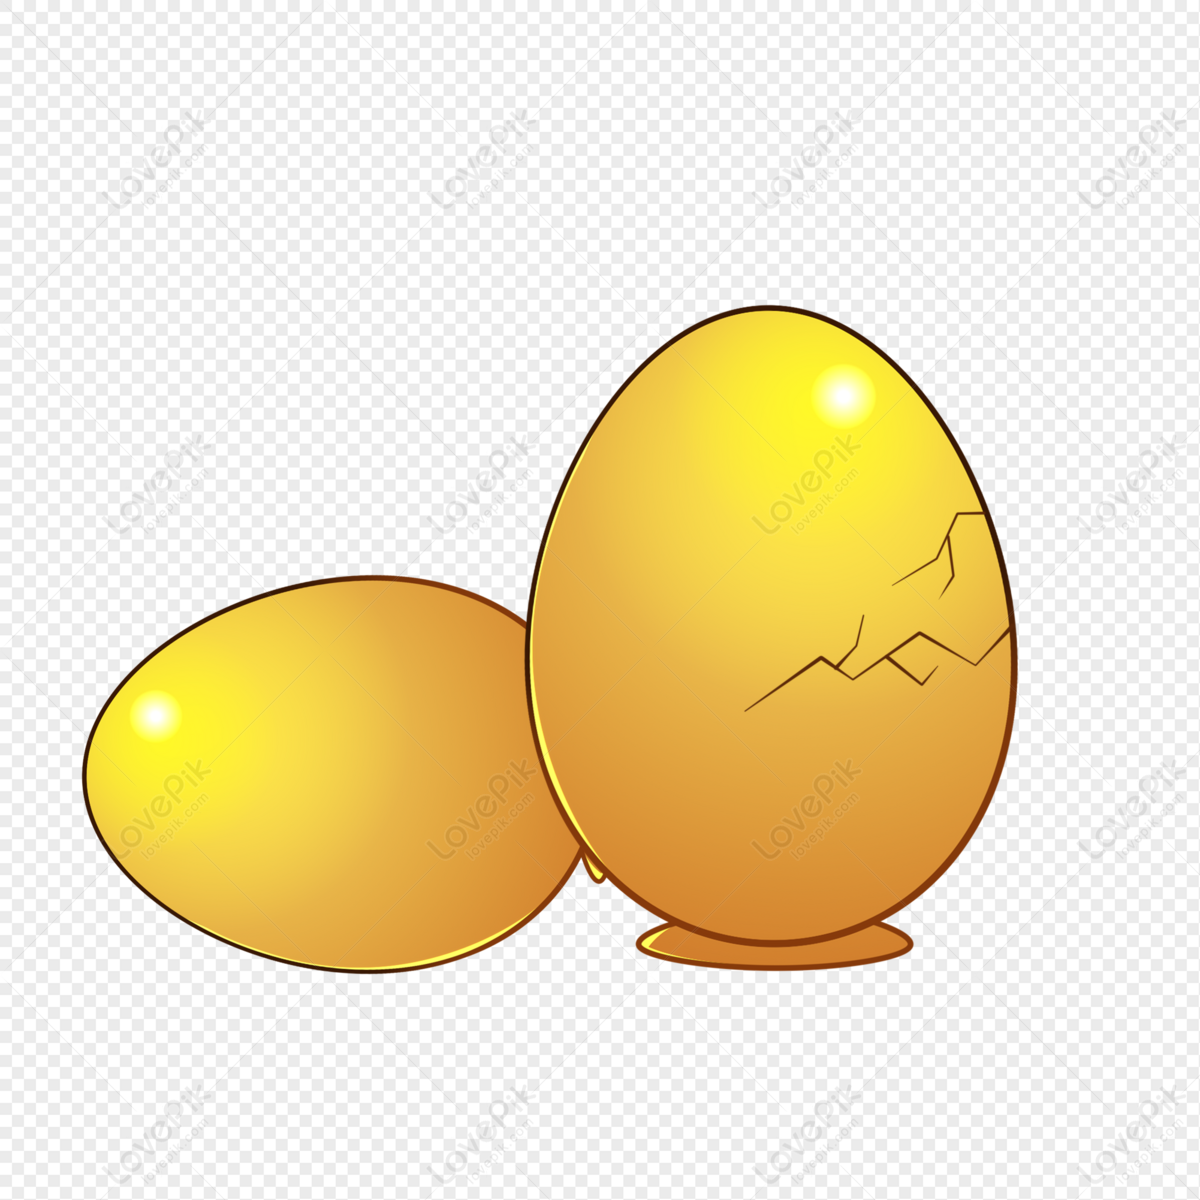 3d Golden Easter Eggs, Golden Easter Eggs, Easter Golden Eggs, 3d  Decorative Golden Easter Eggs PNG Transparent Clipart Image and PSD File  for Free Download in 2023